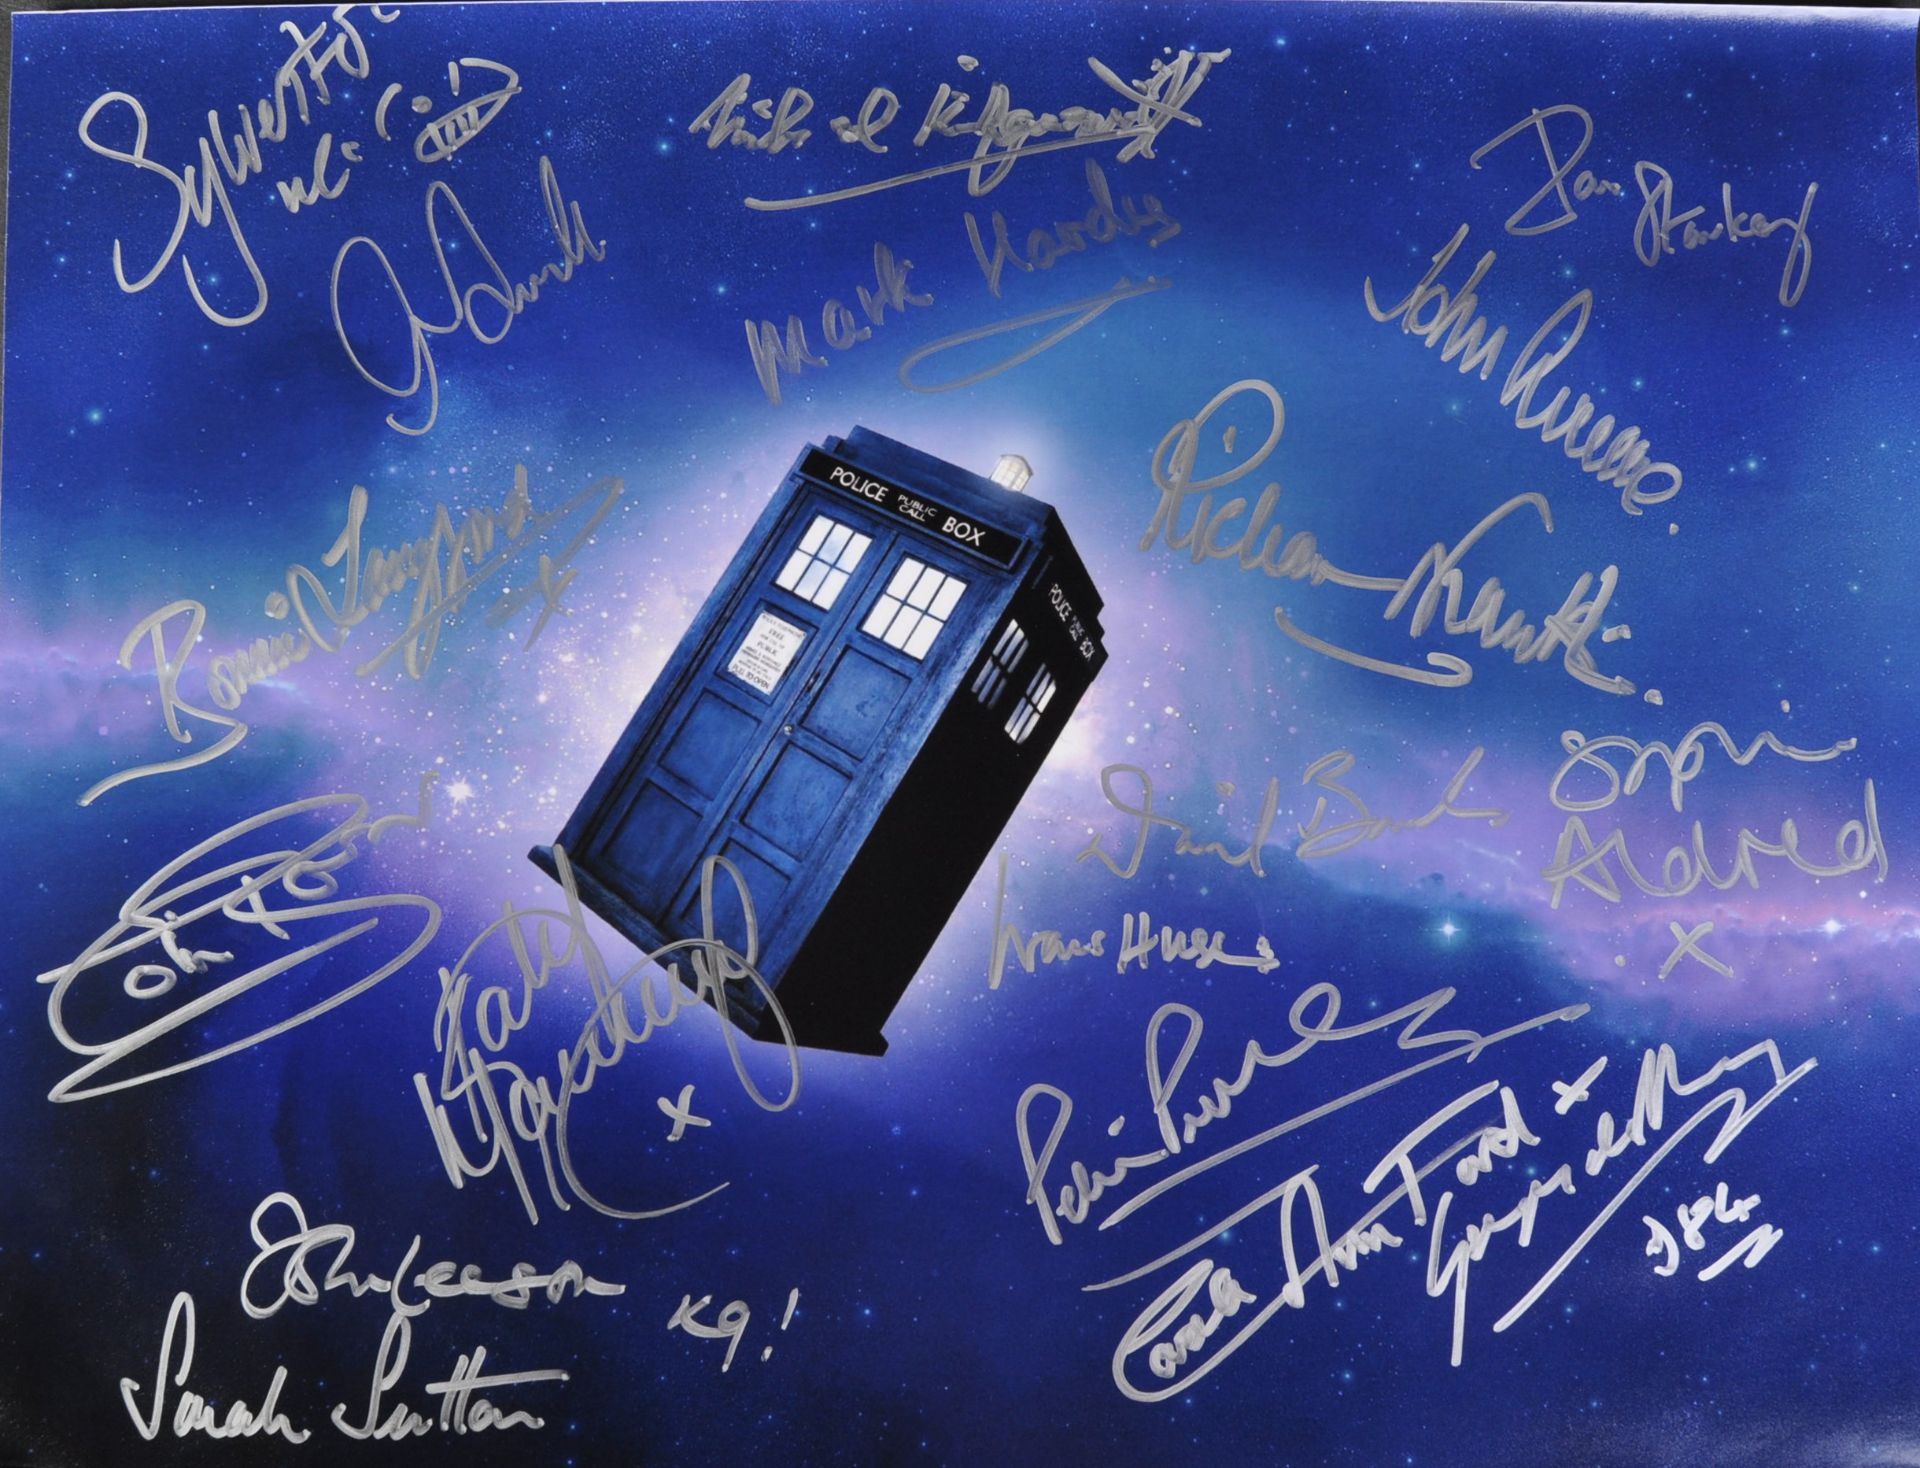 DOCTOR WHO - AUTOGRAPHS - MULTI-SIGNED 16X12" POSTER